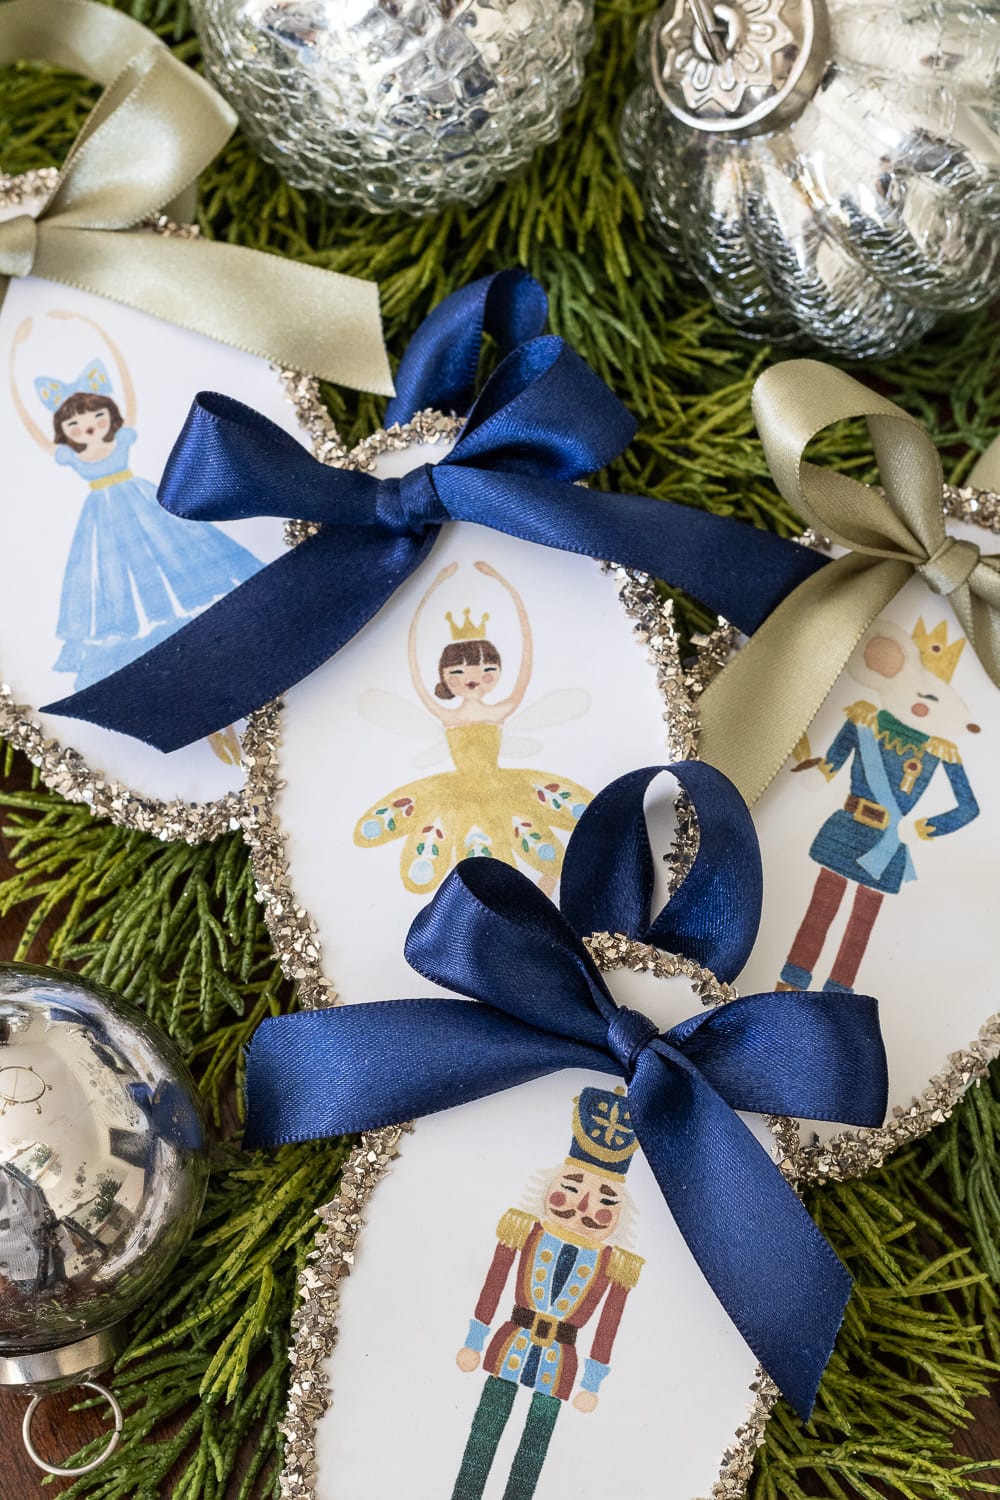 Nutcracker print ornaments with glitter edge and blue ribbons.